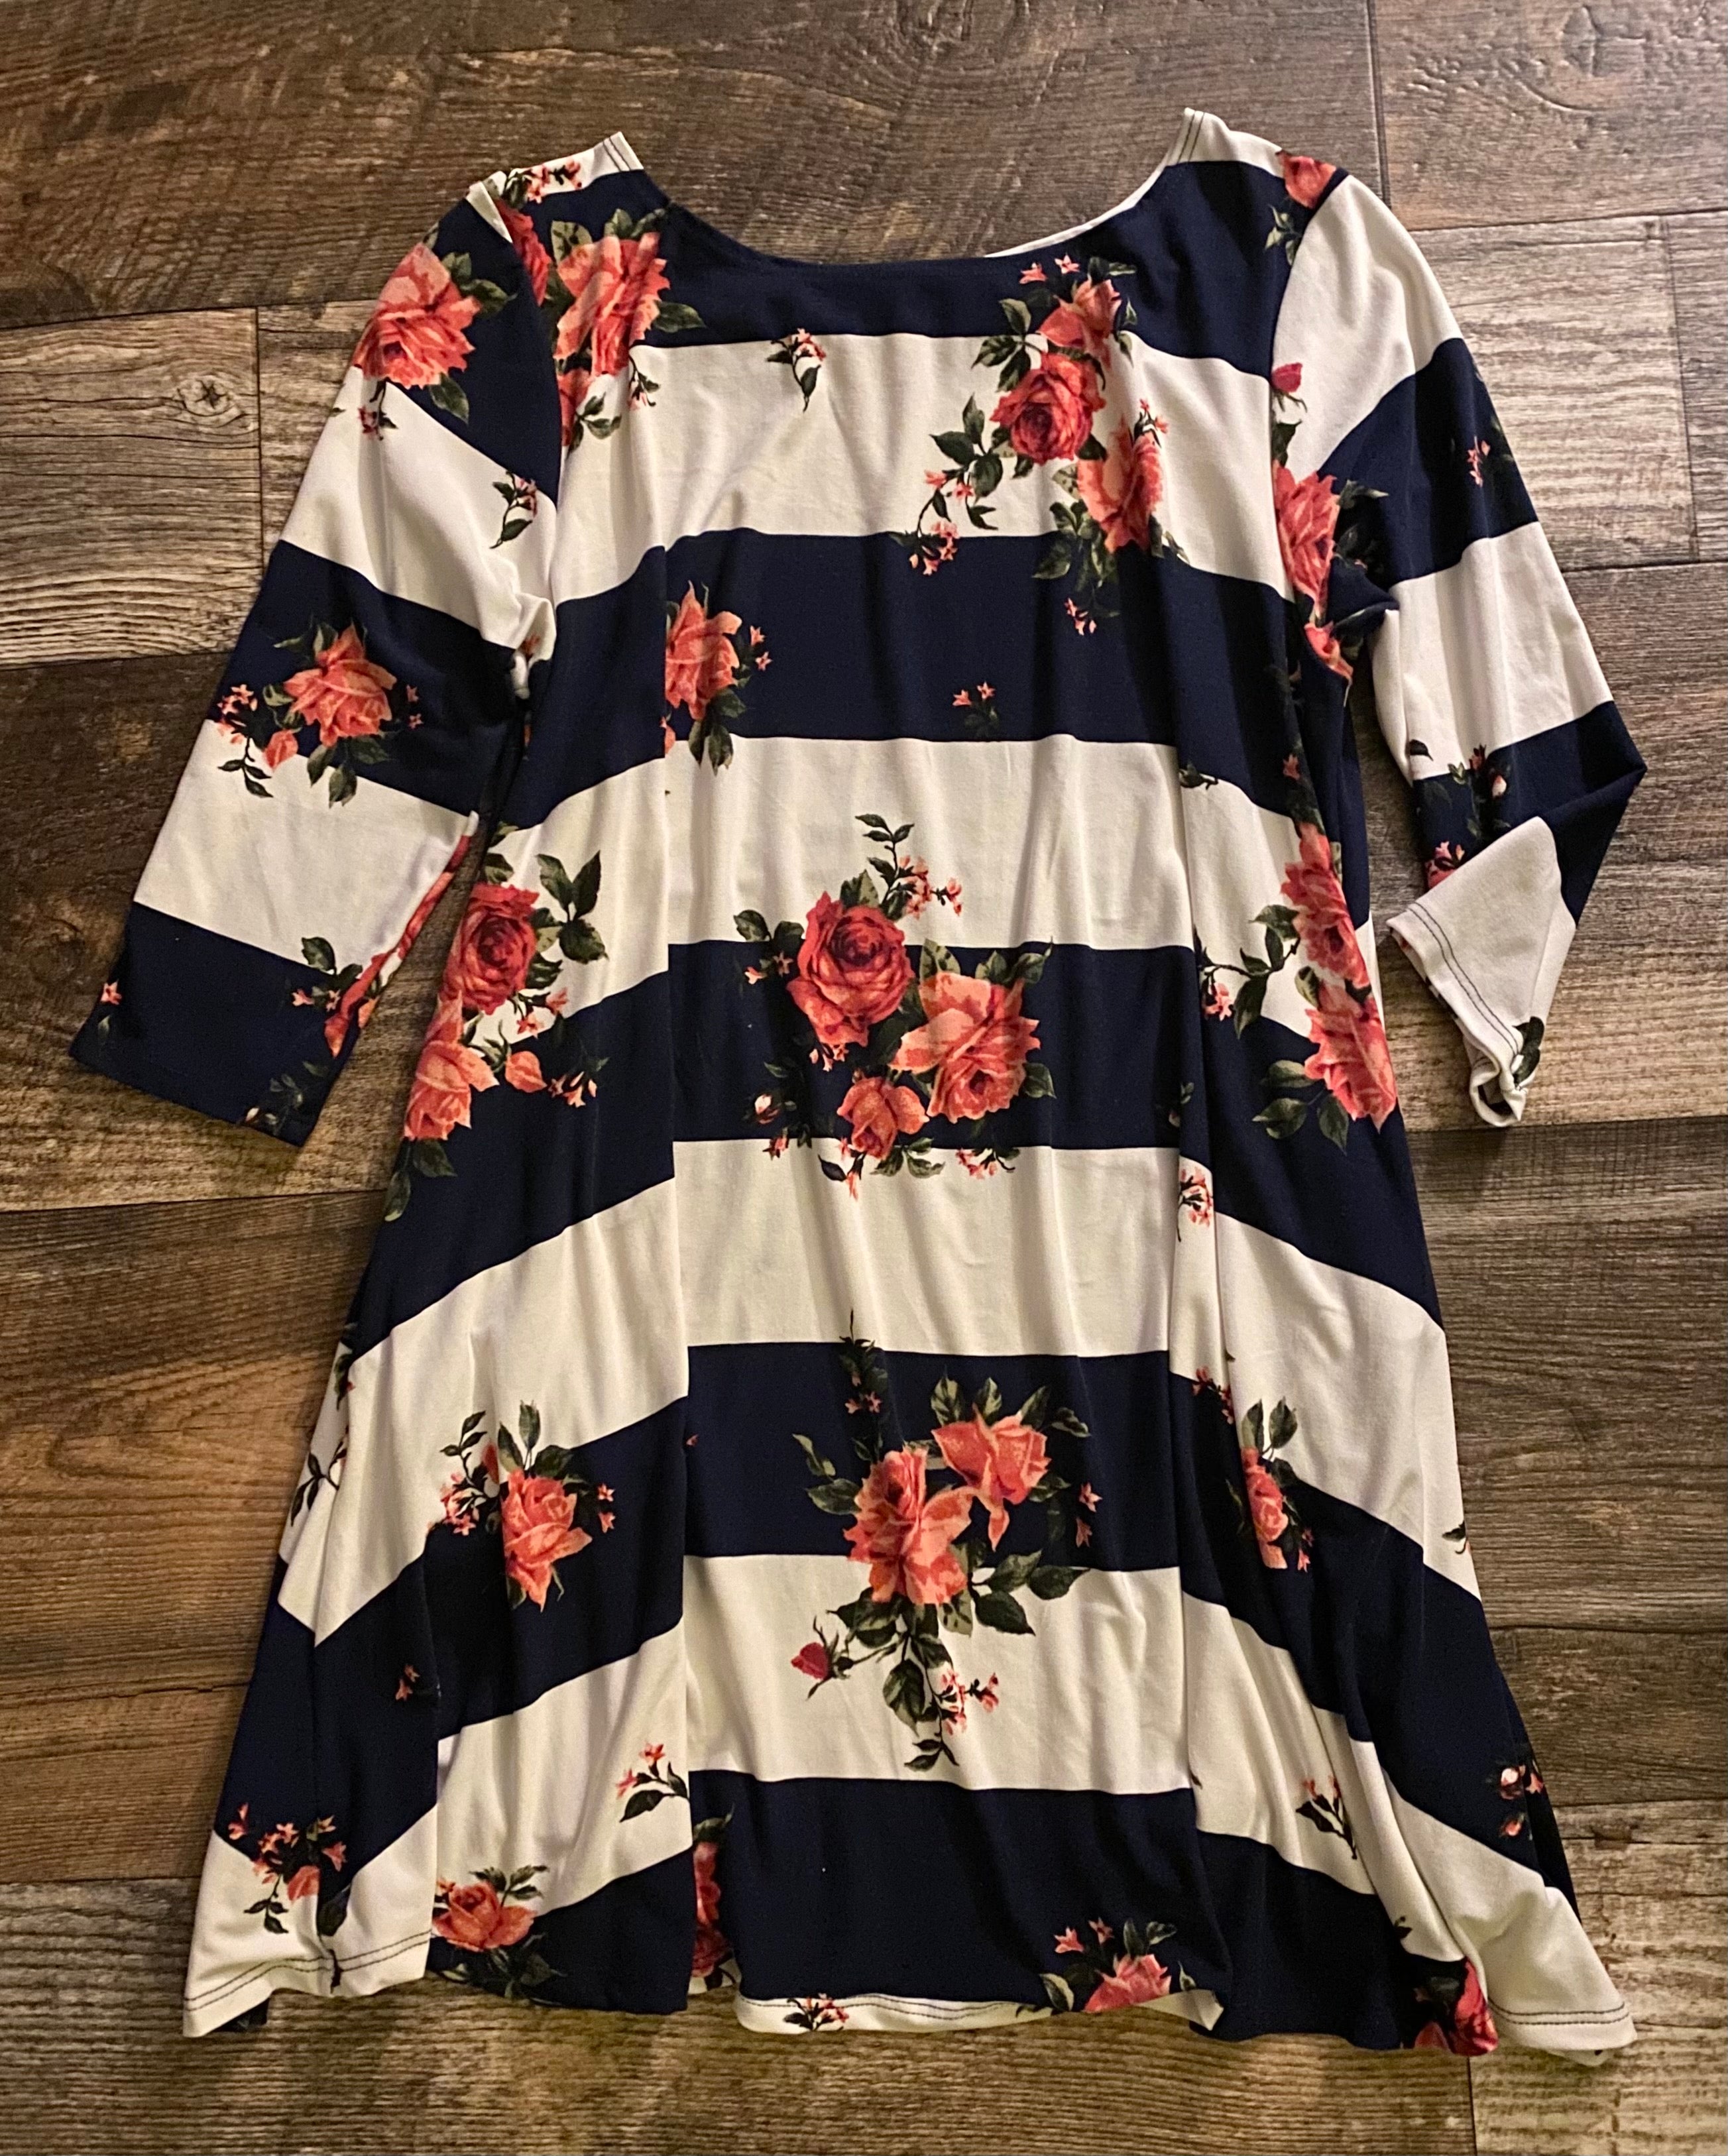 Dress - One Day At a Time Floral Stripe (M)